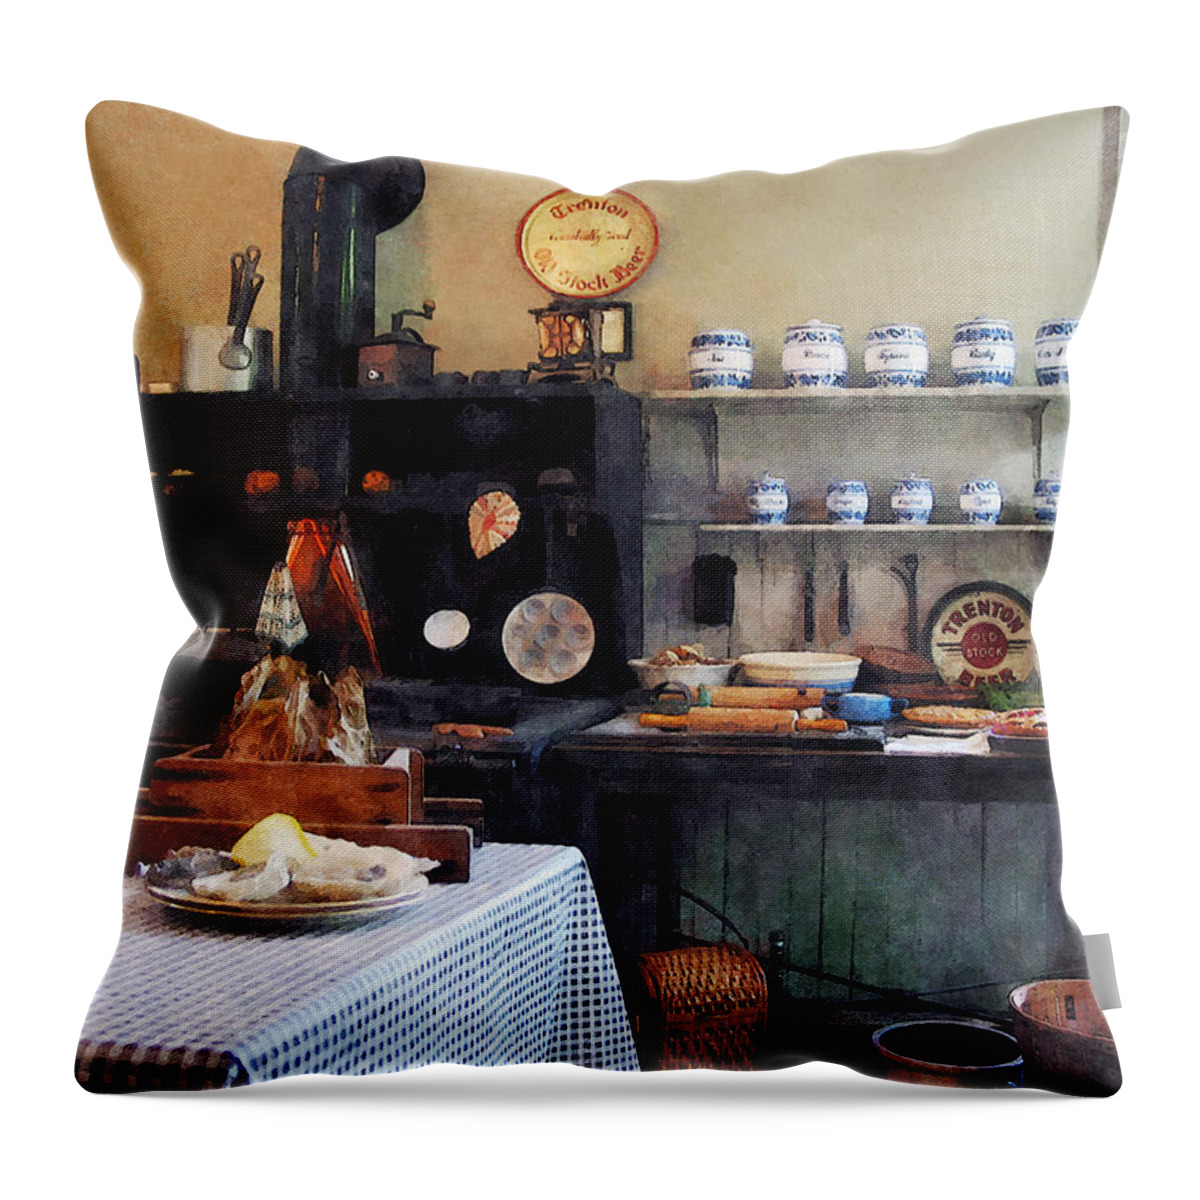 Kitchen Throw Pillow featuring the photograph Cozy Kitchen by Susan Savad